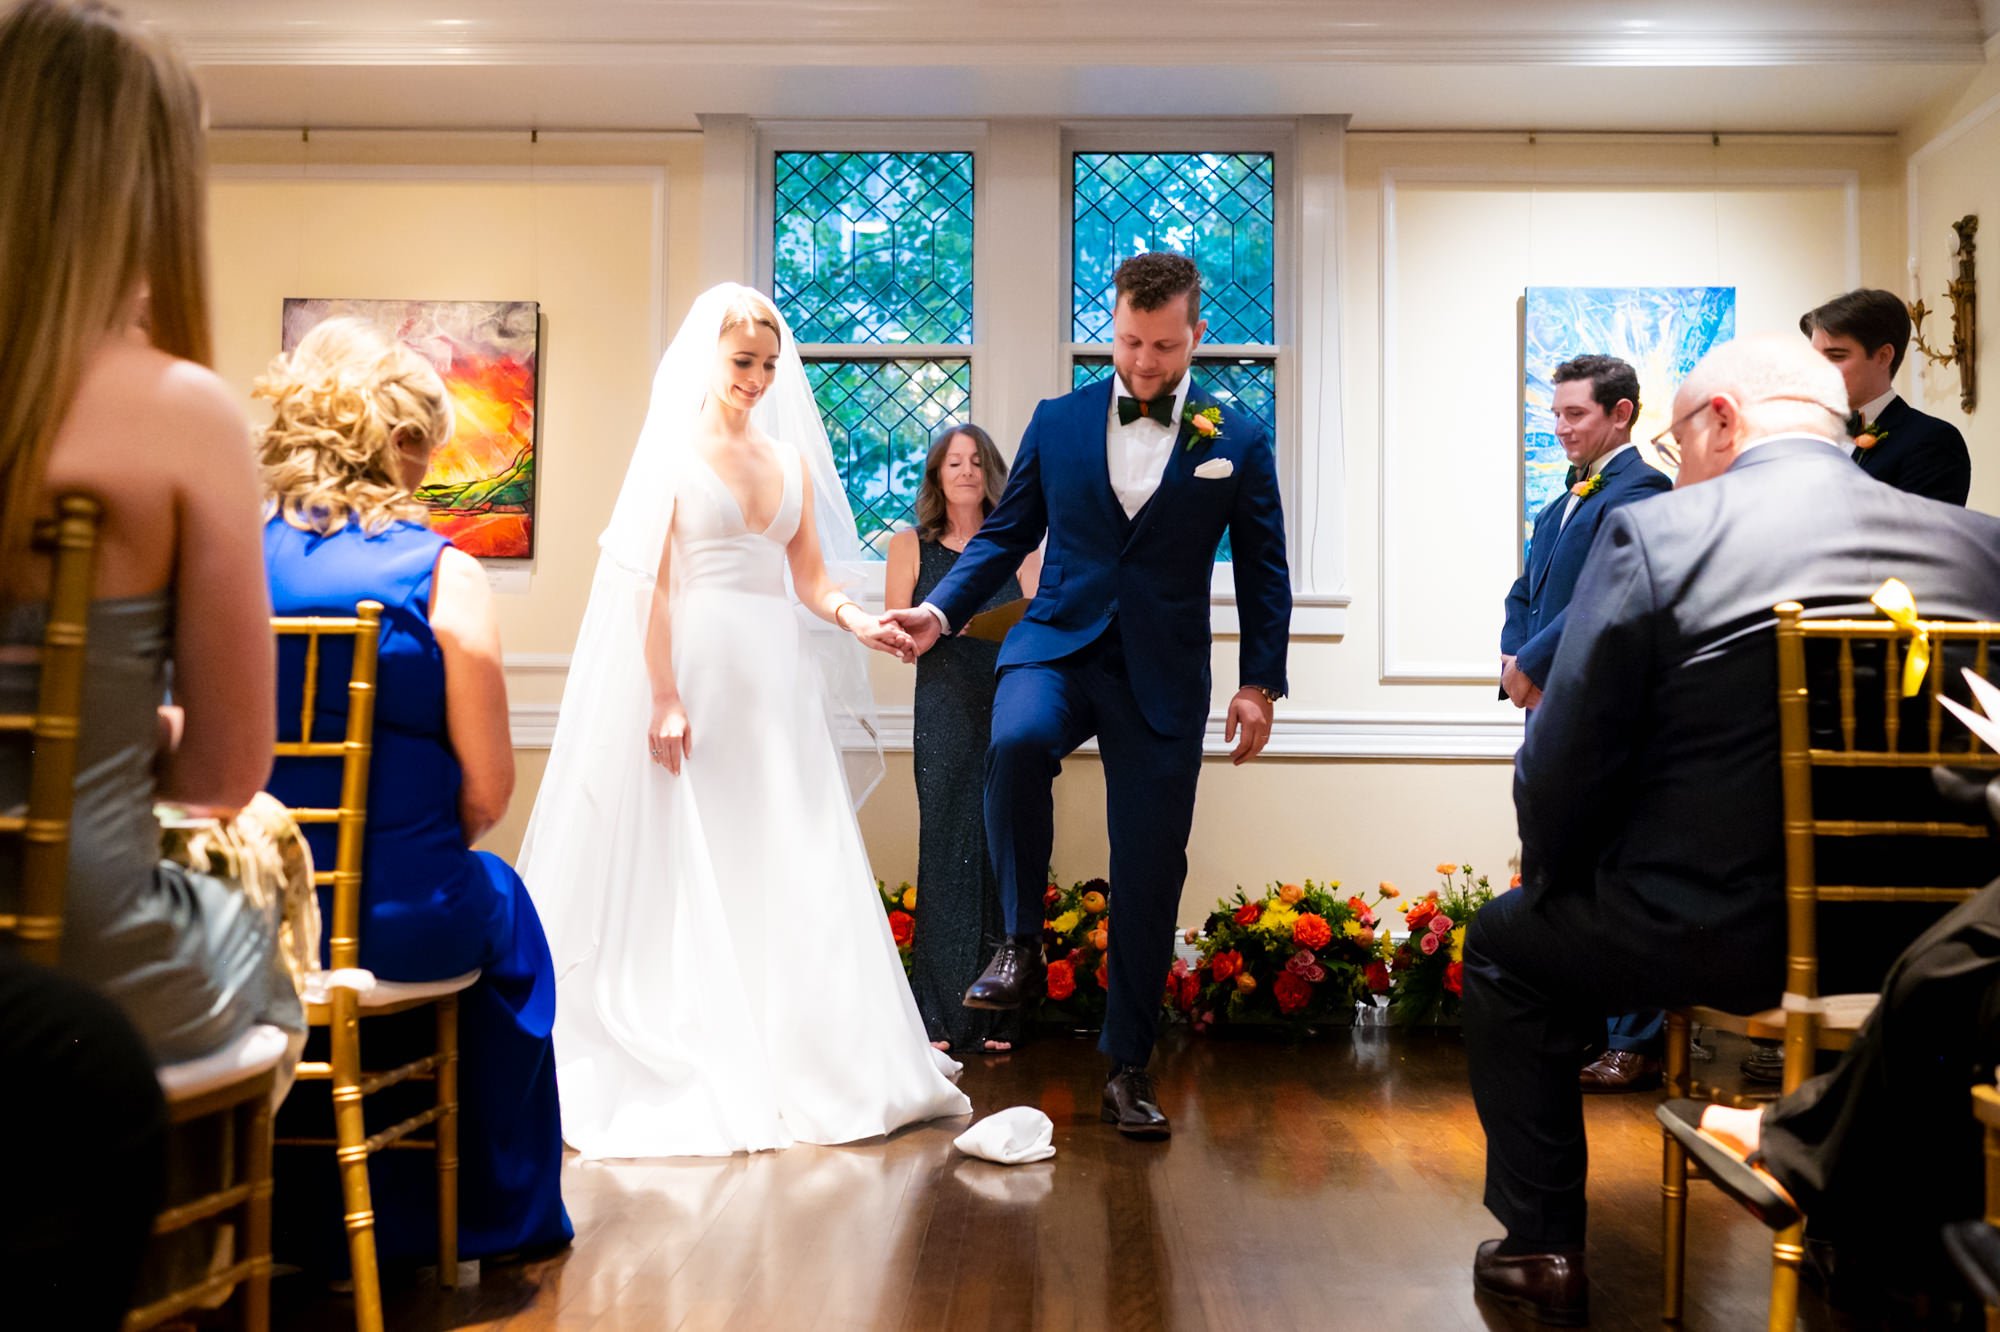 The Whittemore House wedding